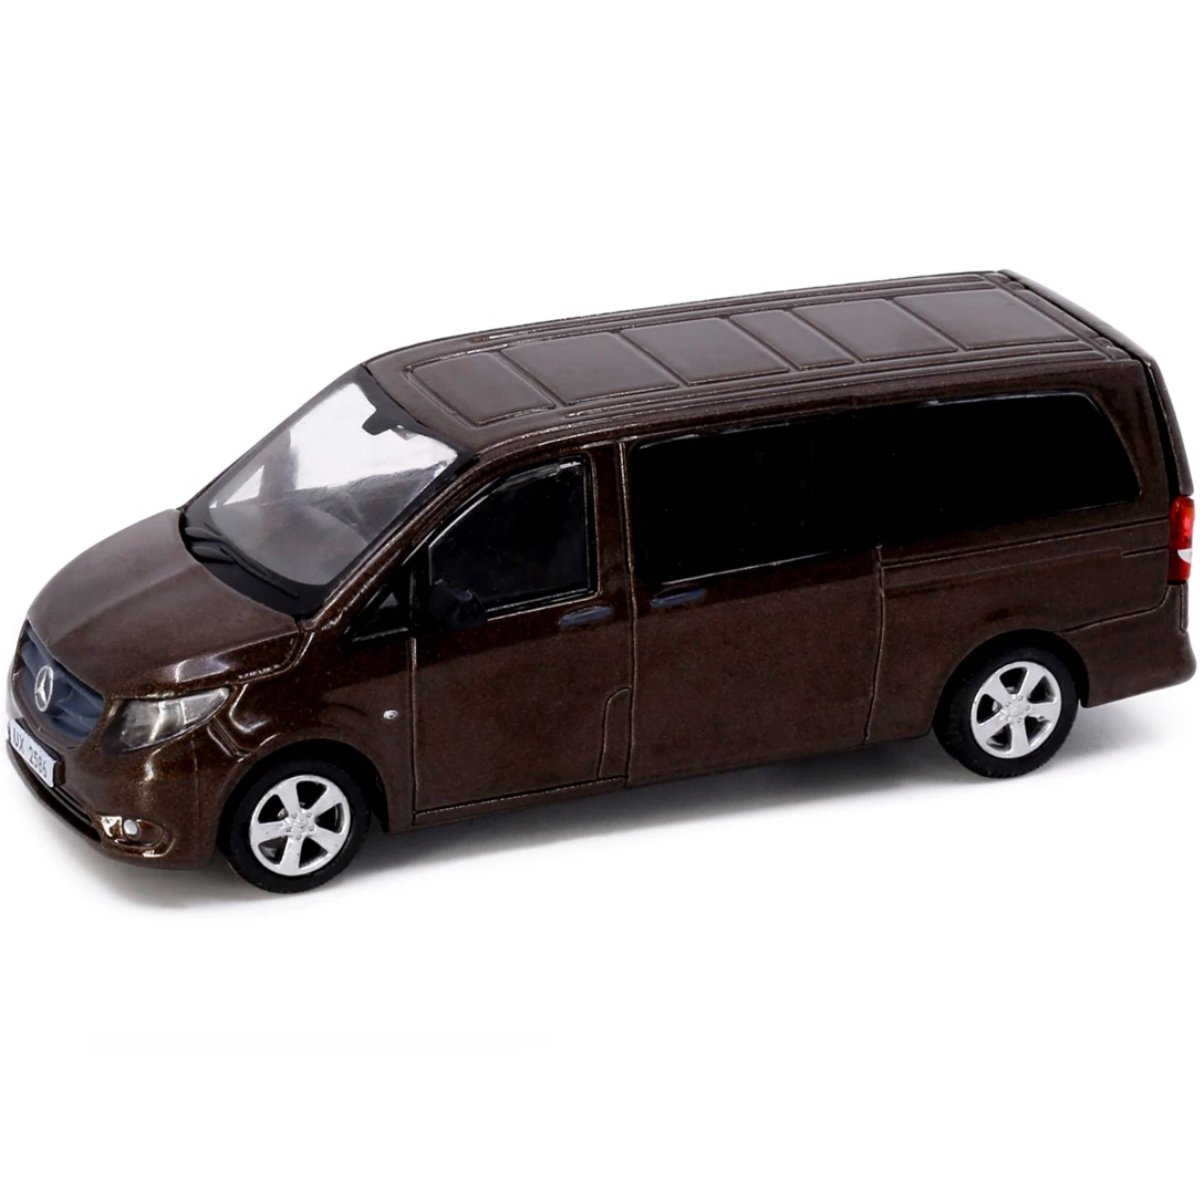 Tiny Models Mercedes-Benz Vito Brown (1:64 Scale) - Phillips Hobbies